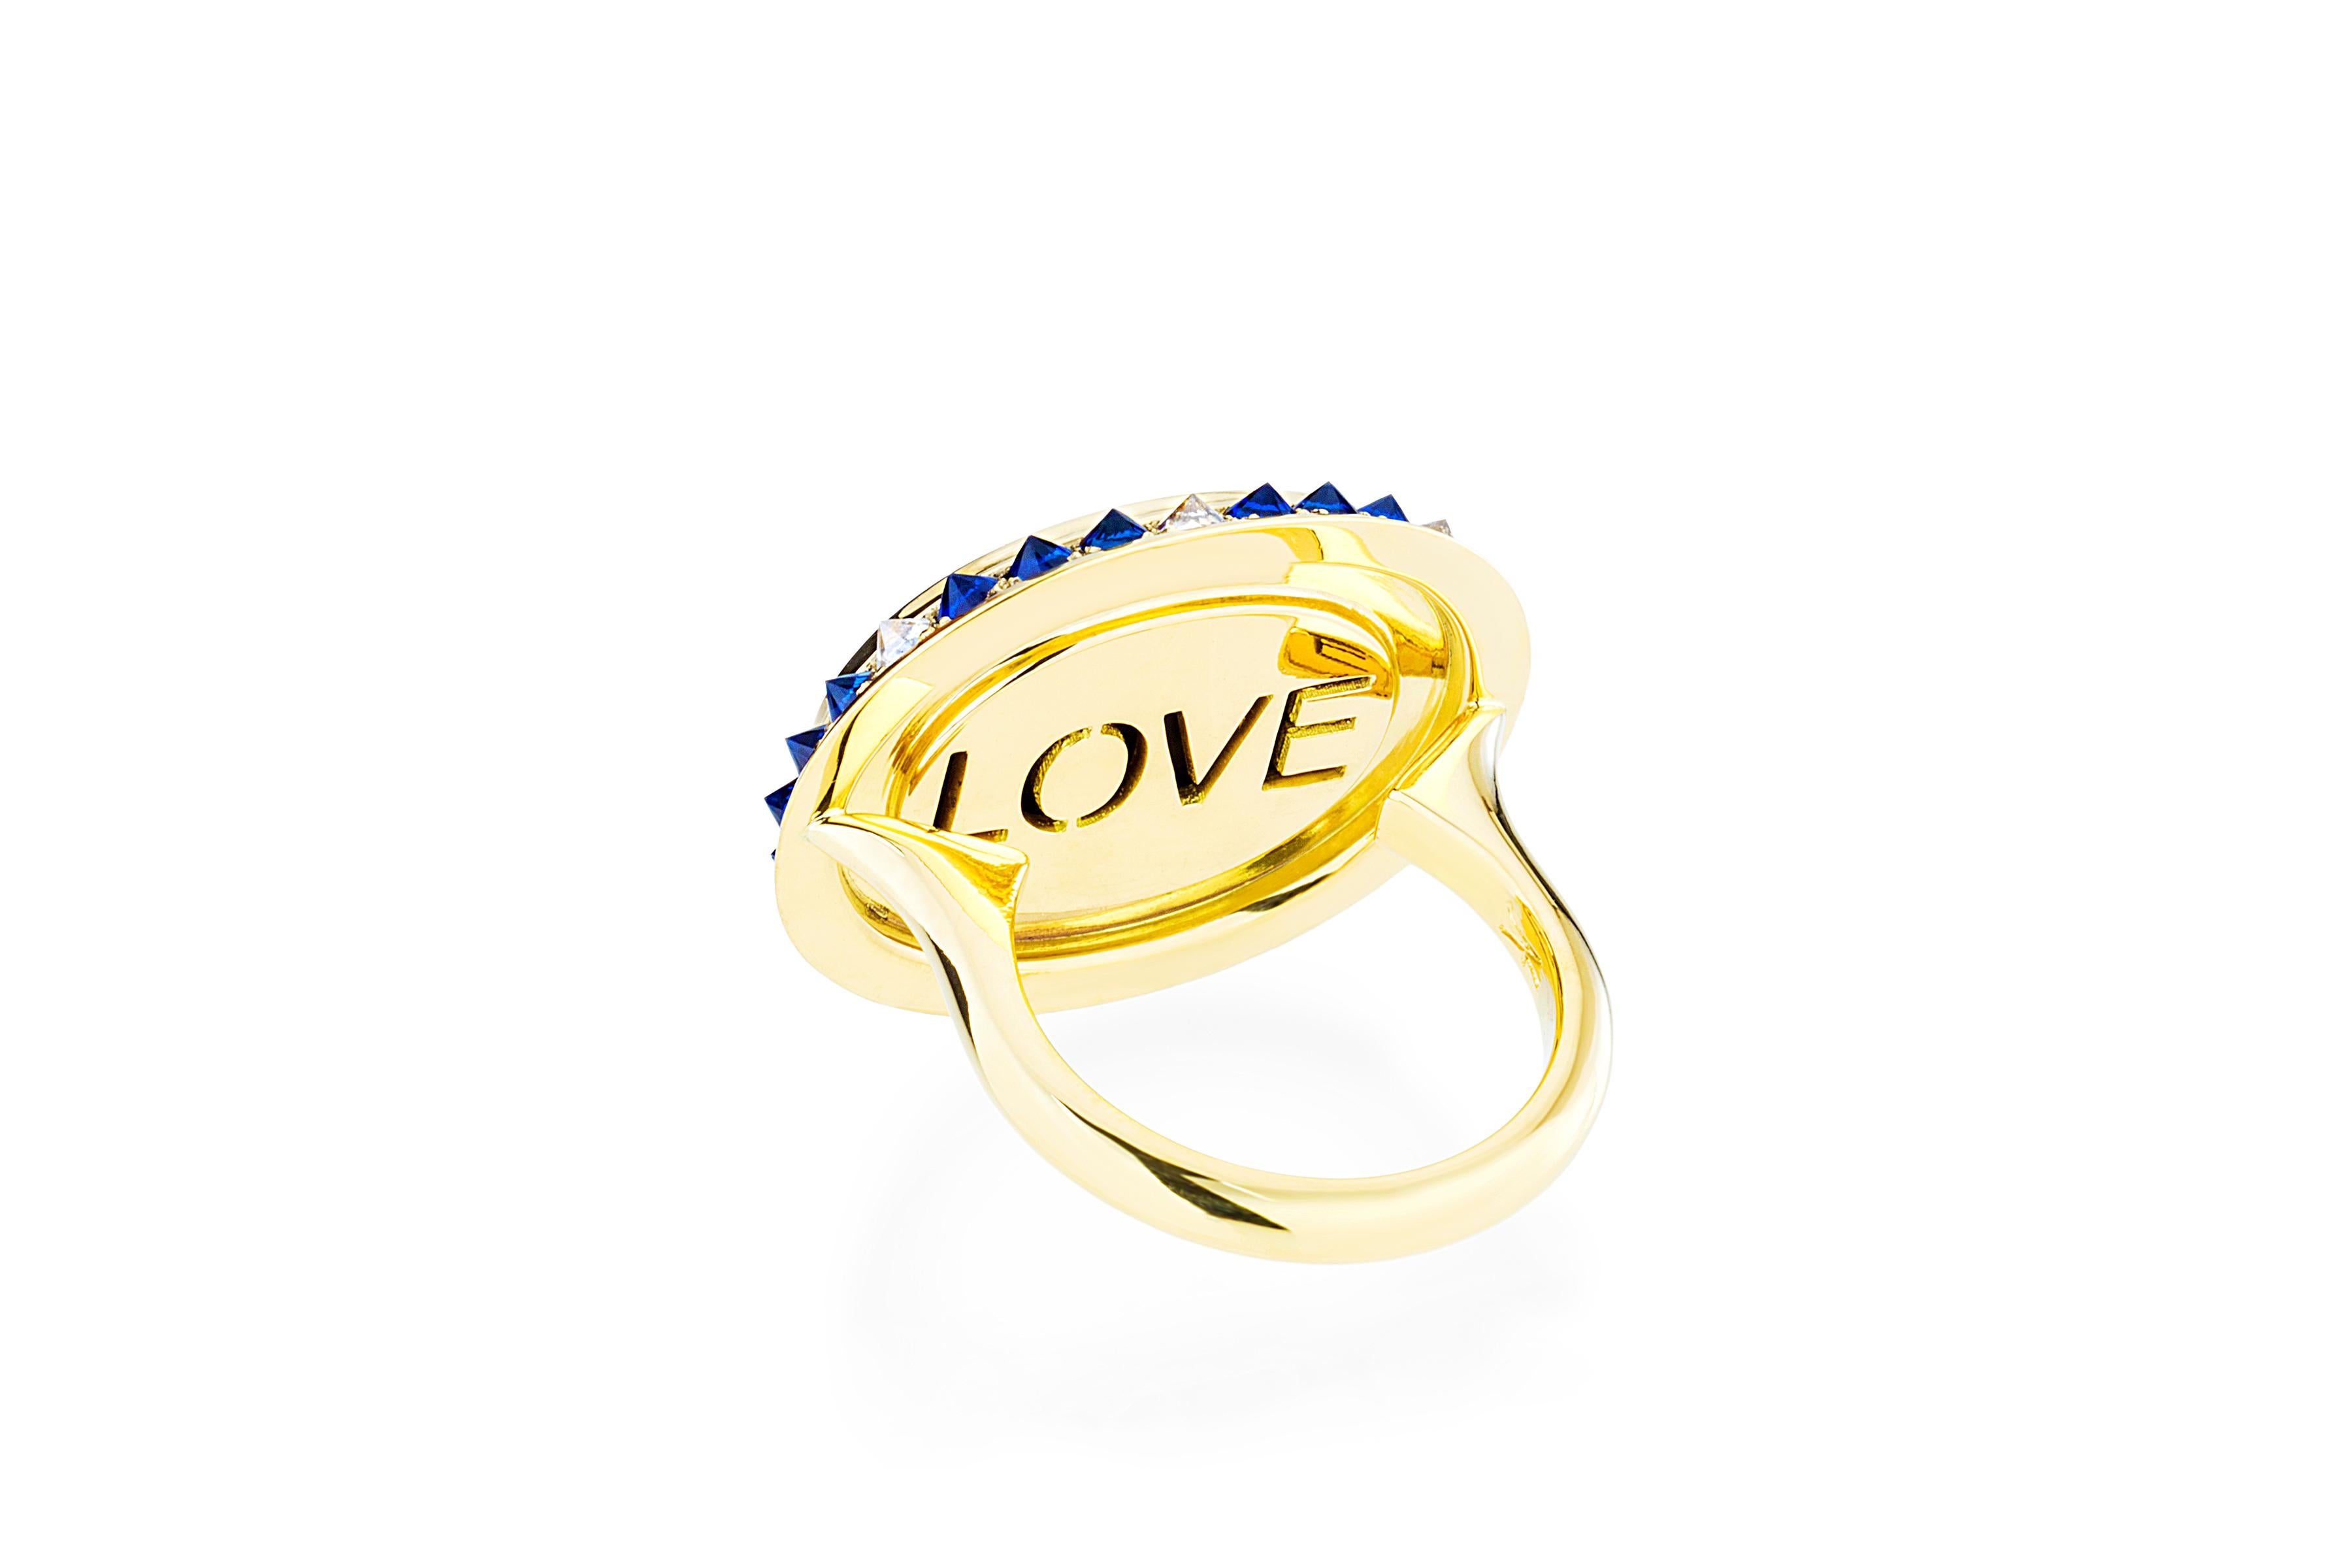 The blue agate cameo in the 'Eye Love Ring' is hand created by a master carver bringing out the colors and depth within the layers of the stone. The cameo is encased in yellow gold, inverted diamonds, and sapphires. As in every piece of the Eye Love